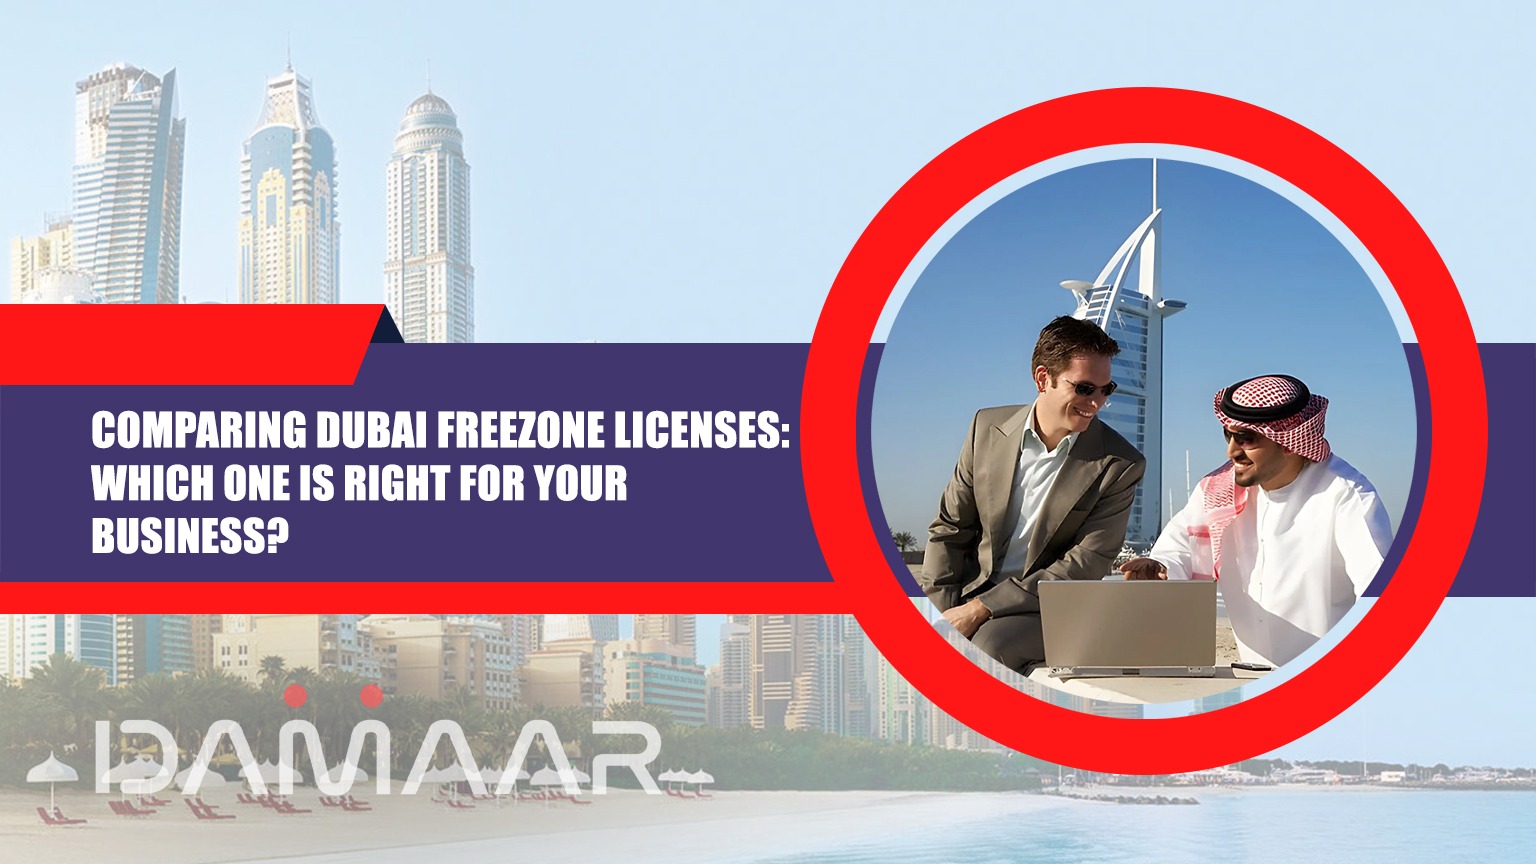 You are currently viewing Comparing Dubai Freezone Licenses: Which One is Right for Your Business?